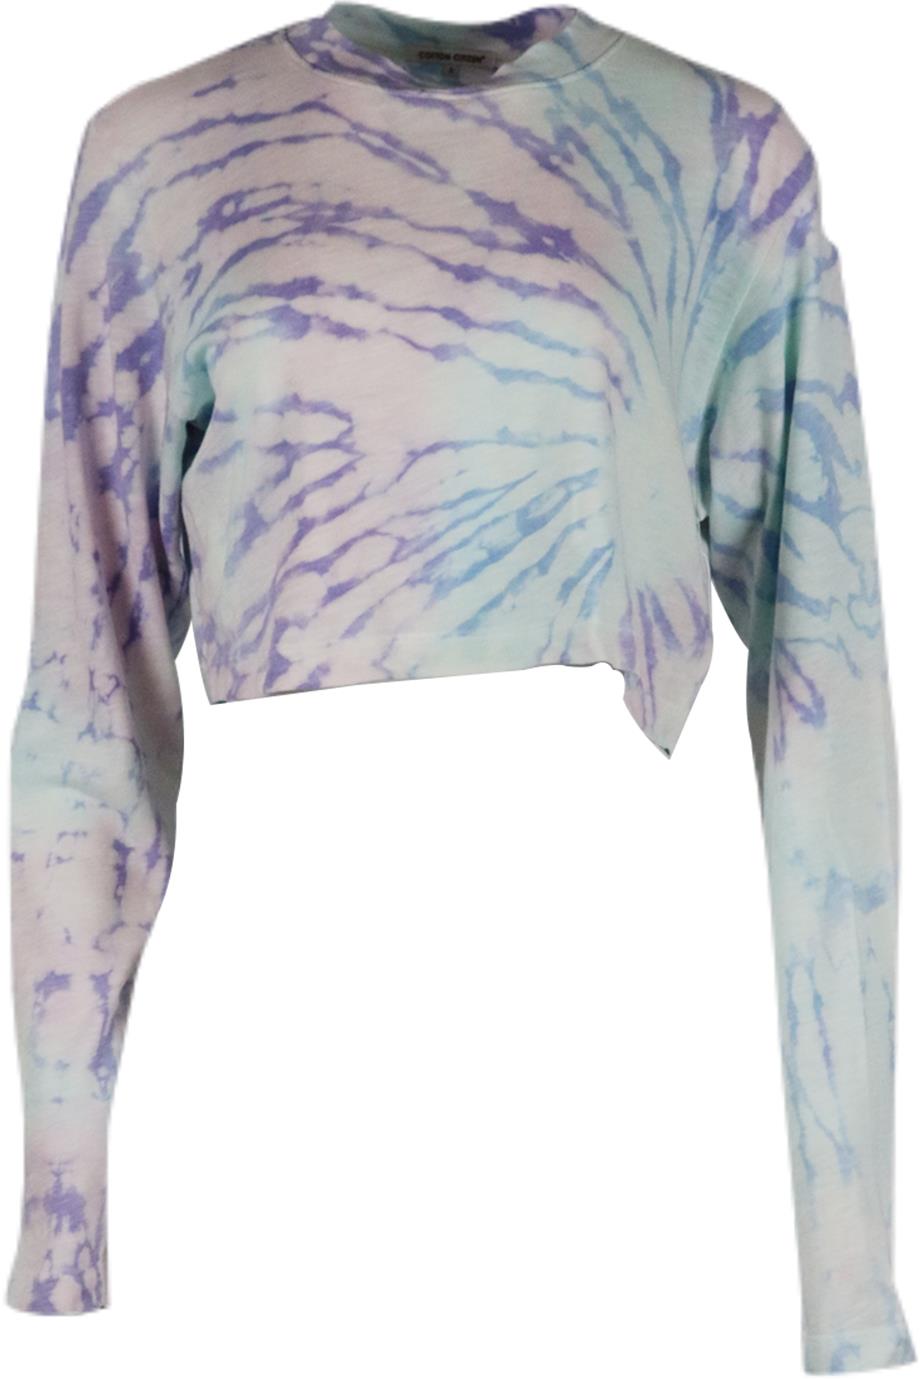 COTTON CITIZEN CROPPED TIE DYED COTTON TOP SMALL